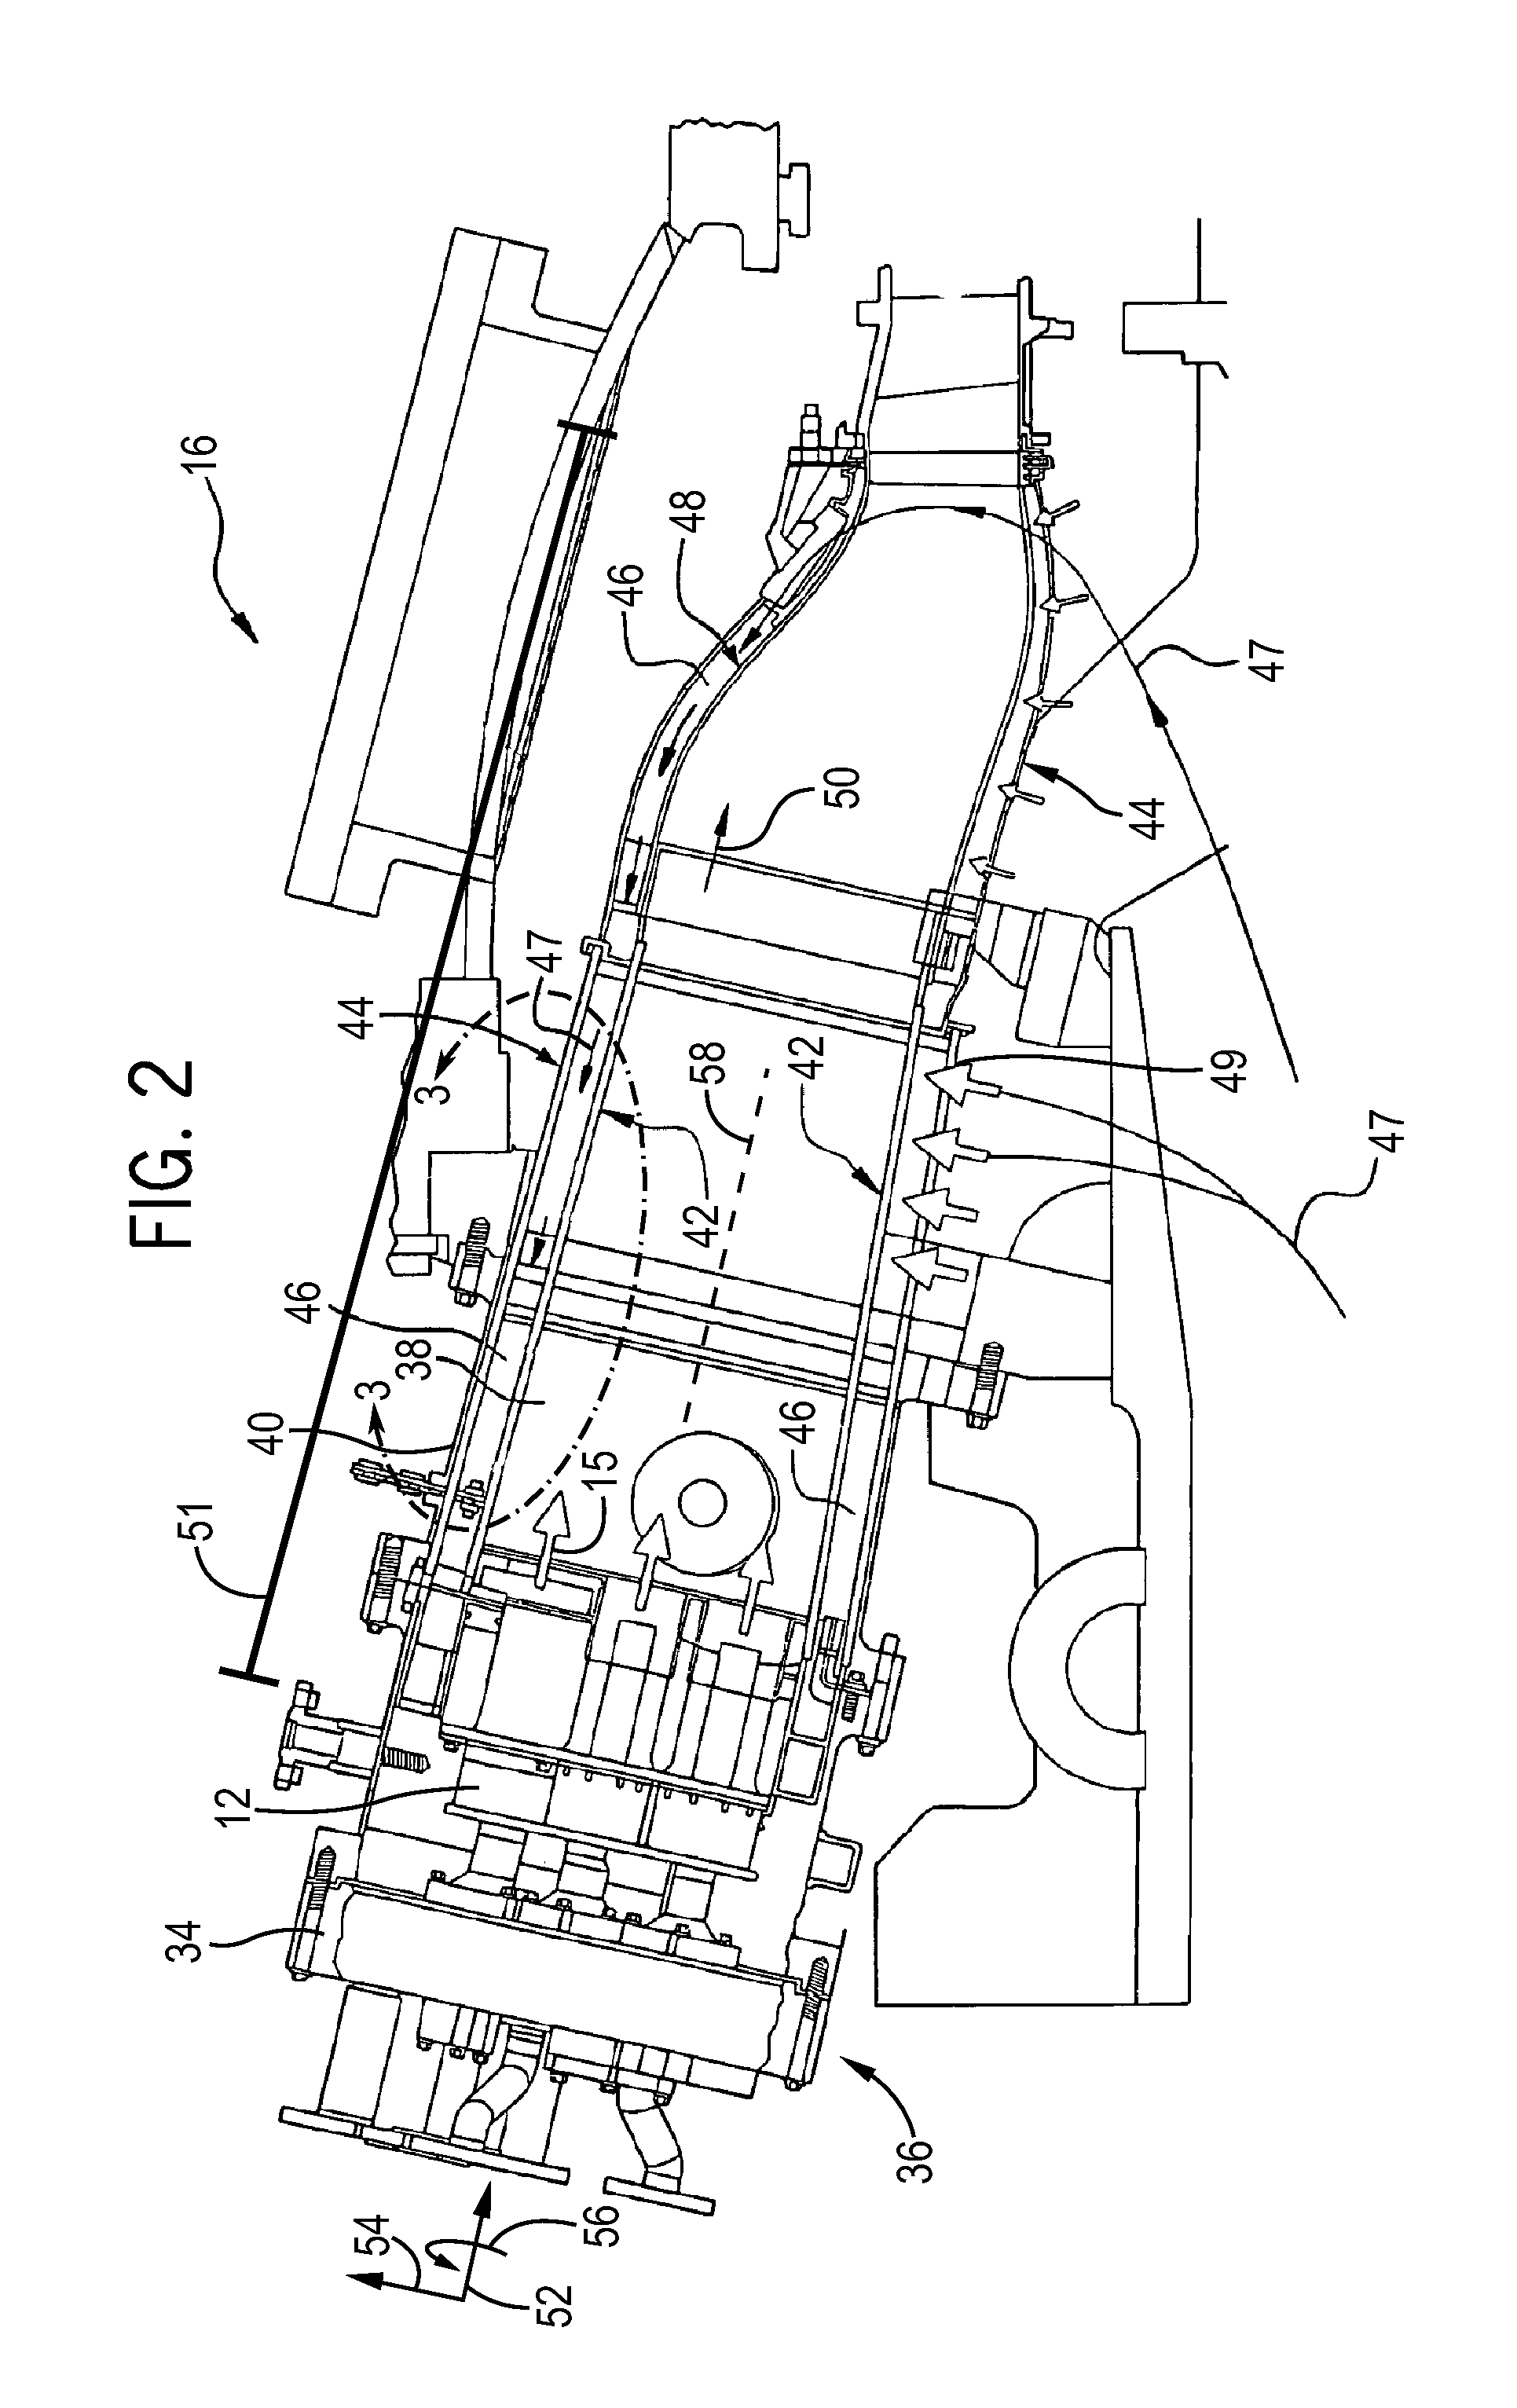 System and method for flow control in gas turbine engine